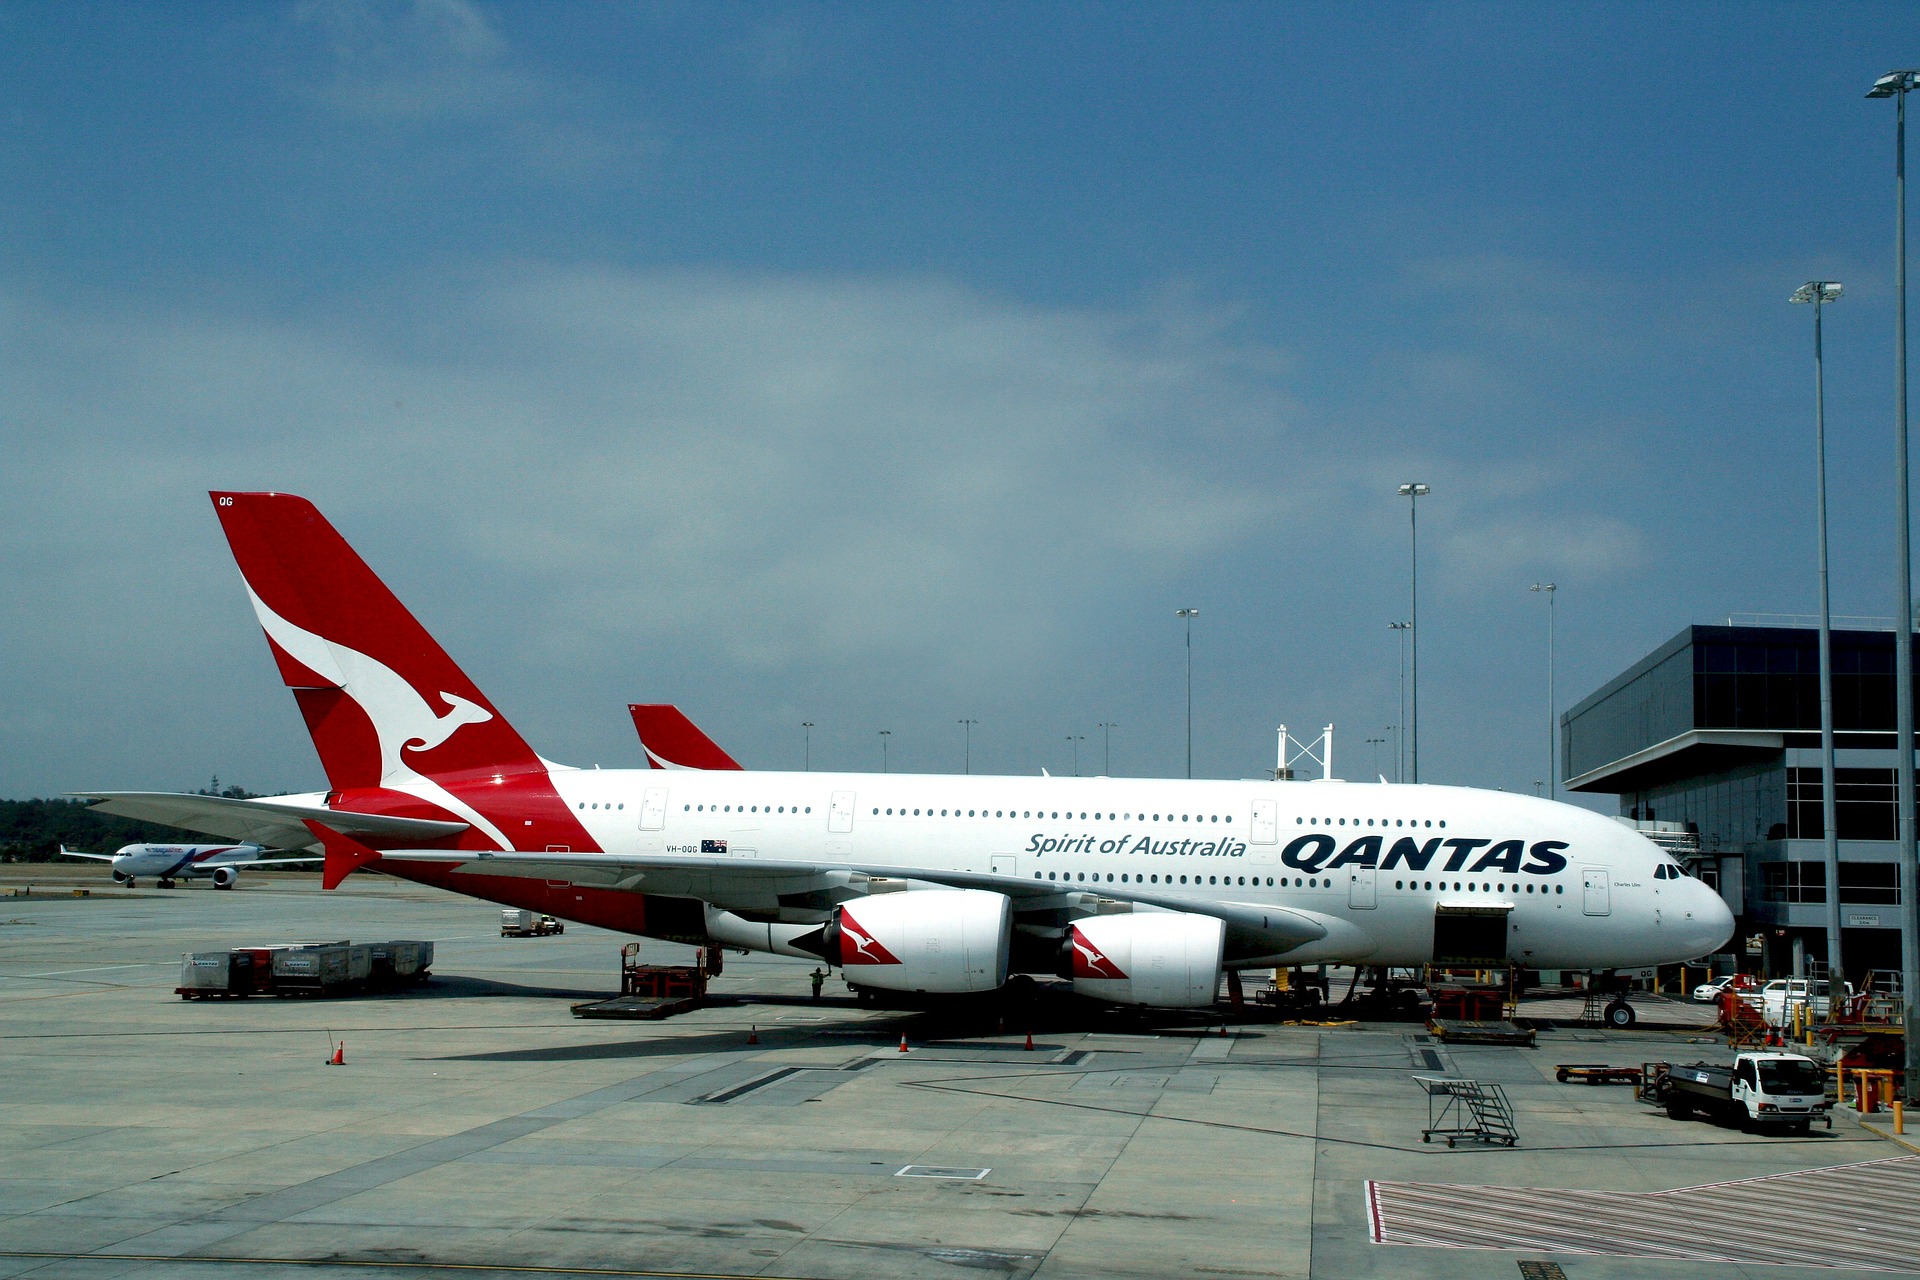 Share miles and points with Qantas